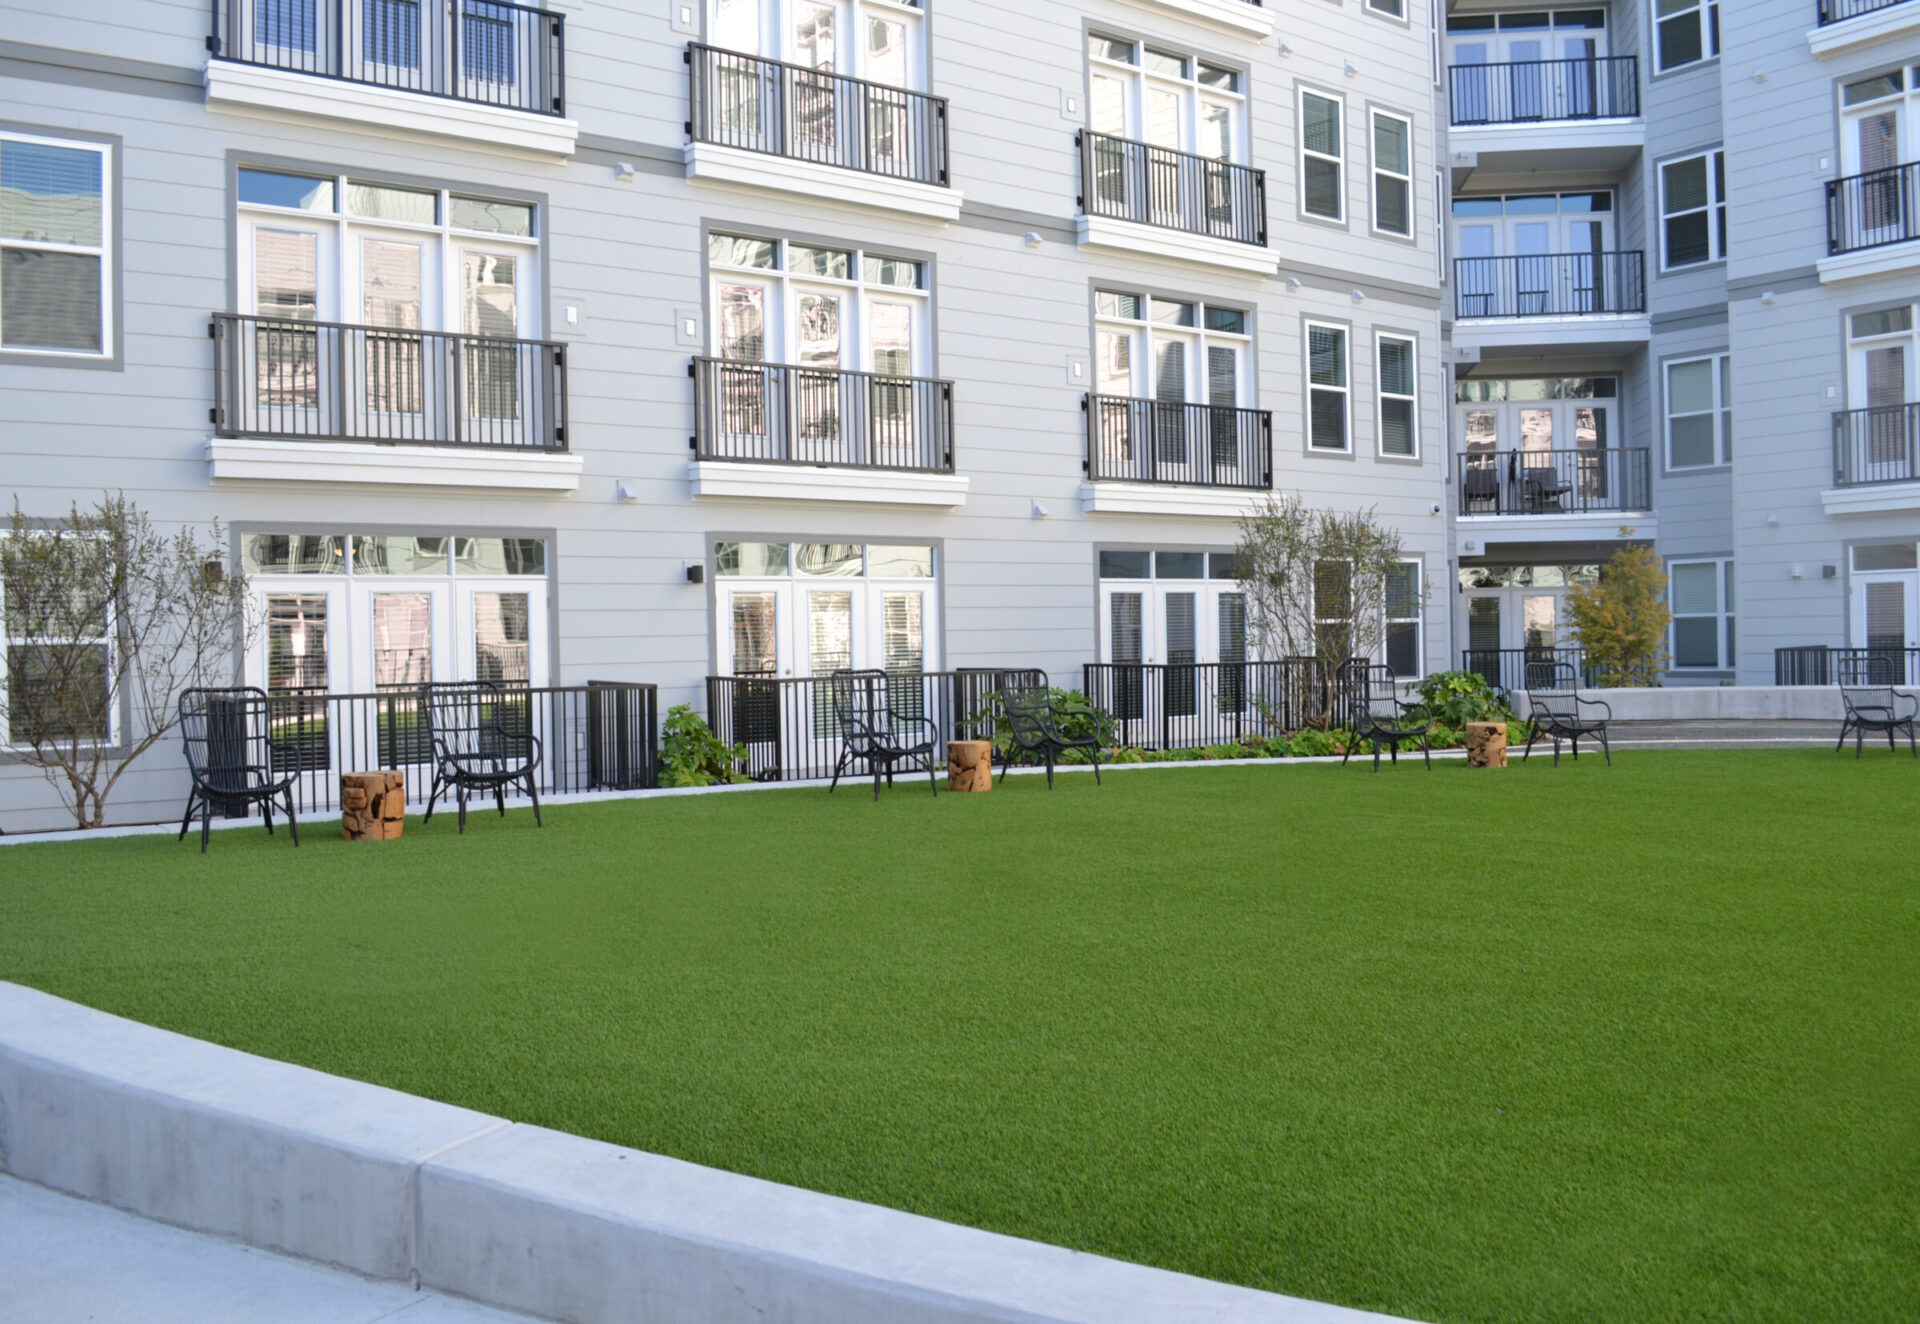 This image shows a well-manicured green space with artificial turf, surrounded by a residential building with balconies, seating areas, and decorative plants.